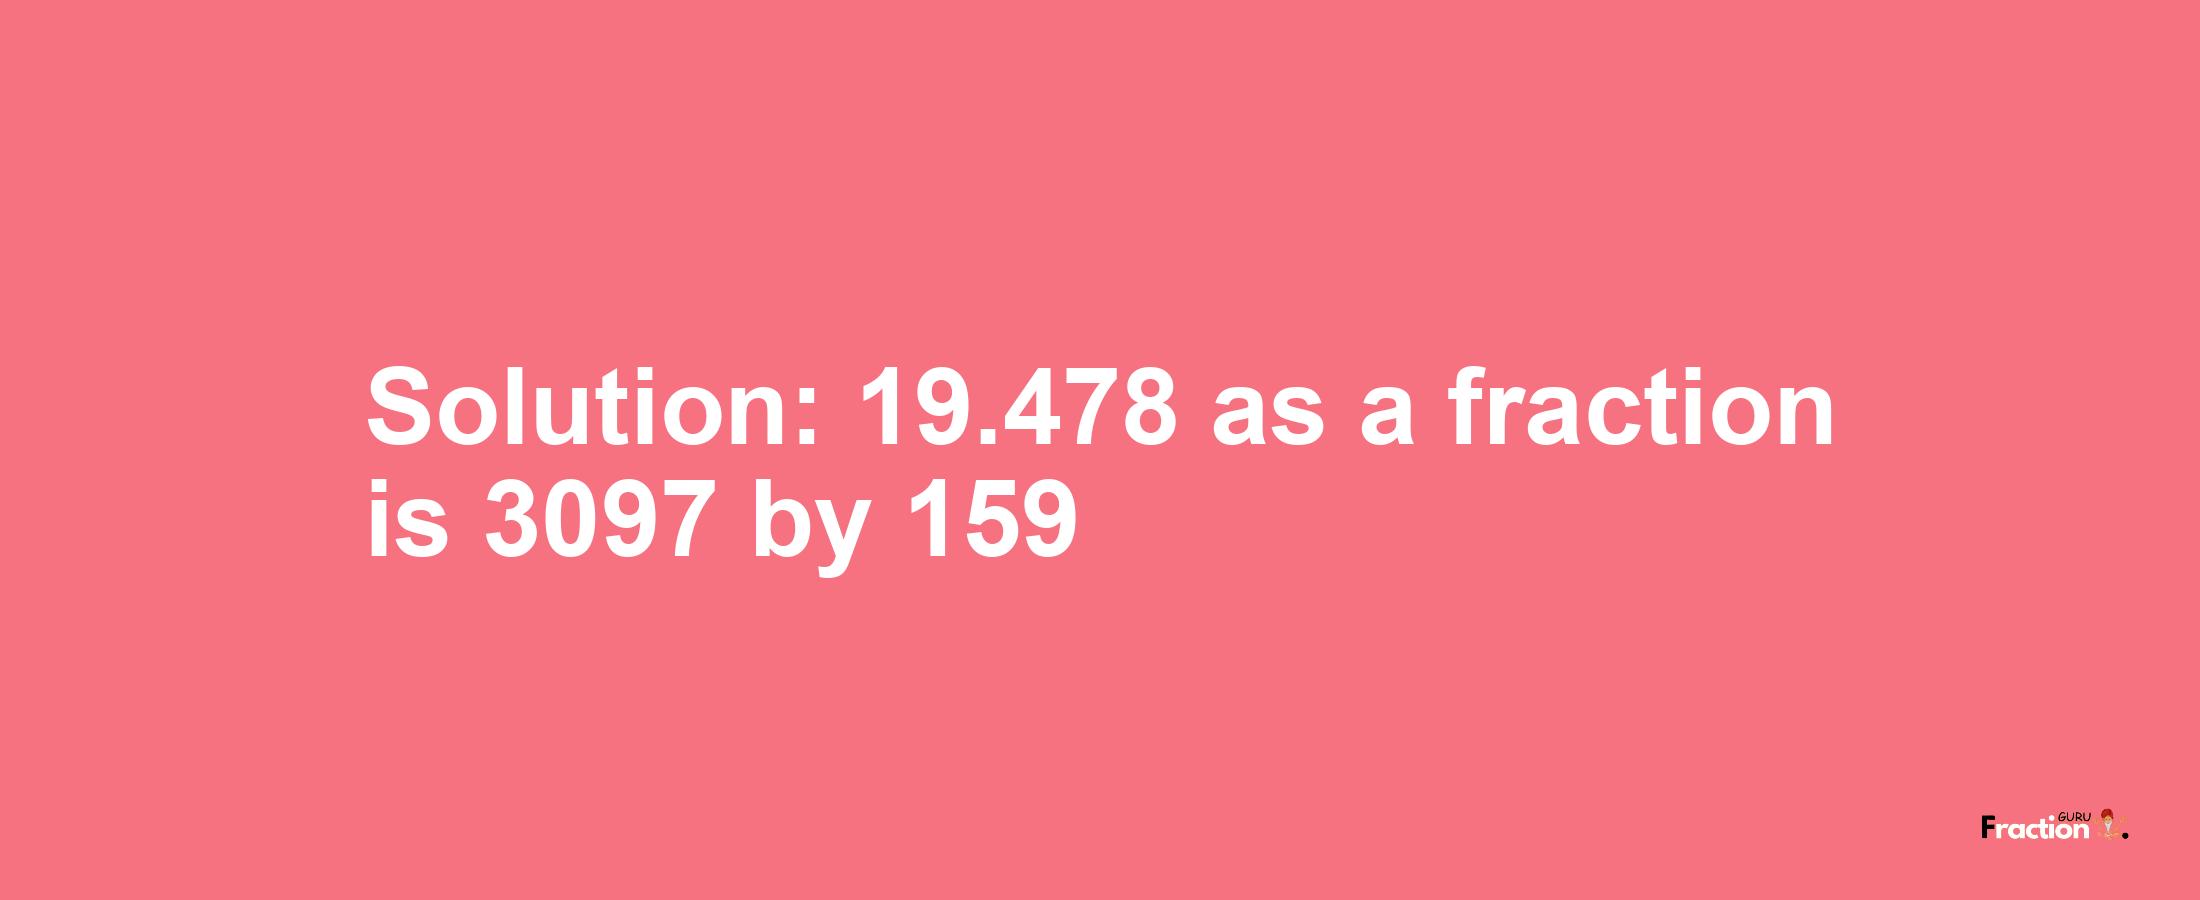 Solution:19.478 as a fraction is 3097/159